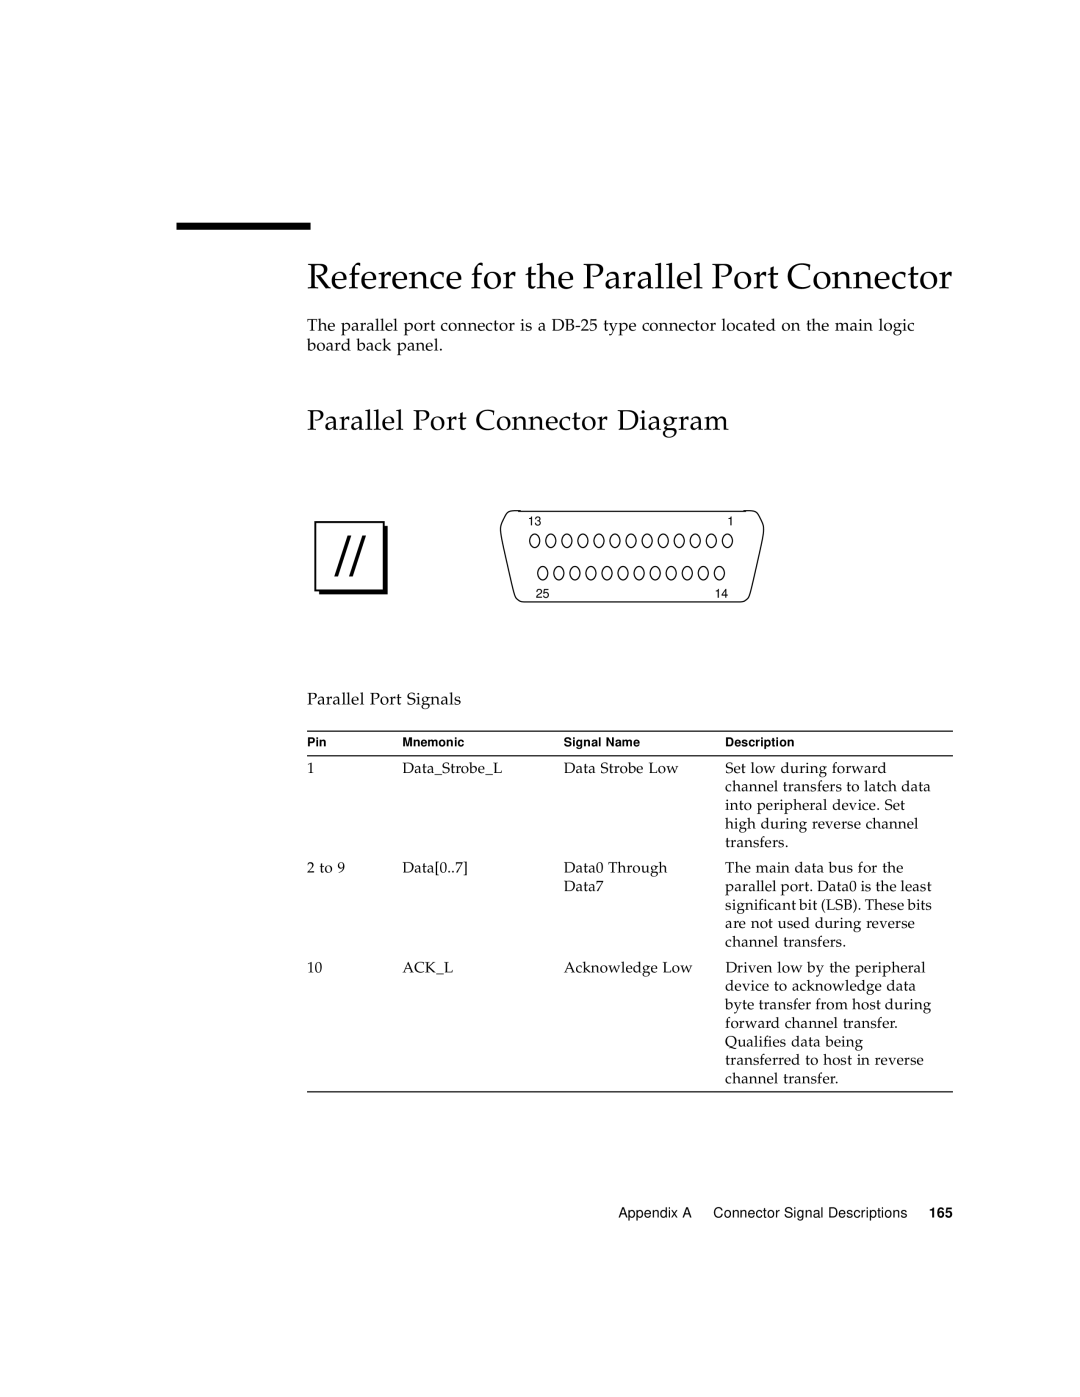 Sun Microsystems 220R manual Reference for the Parallel Port Connector, Parallel Port Connector Diagram 